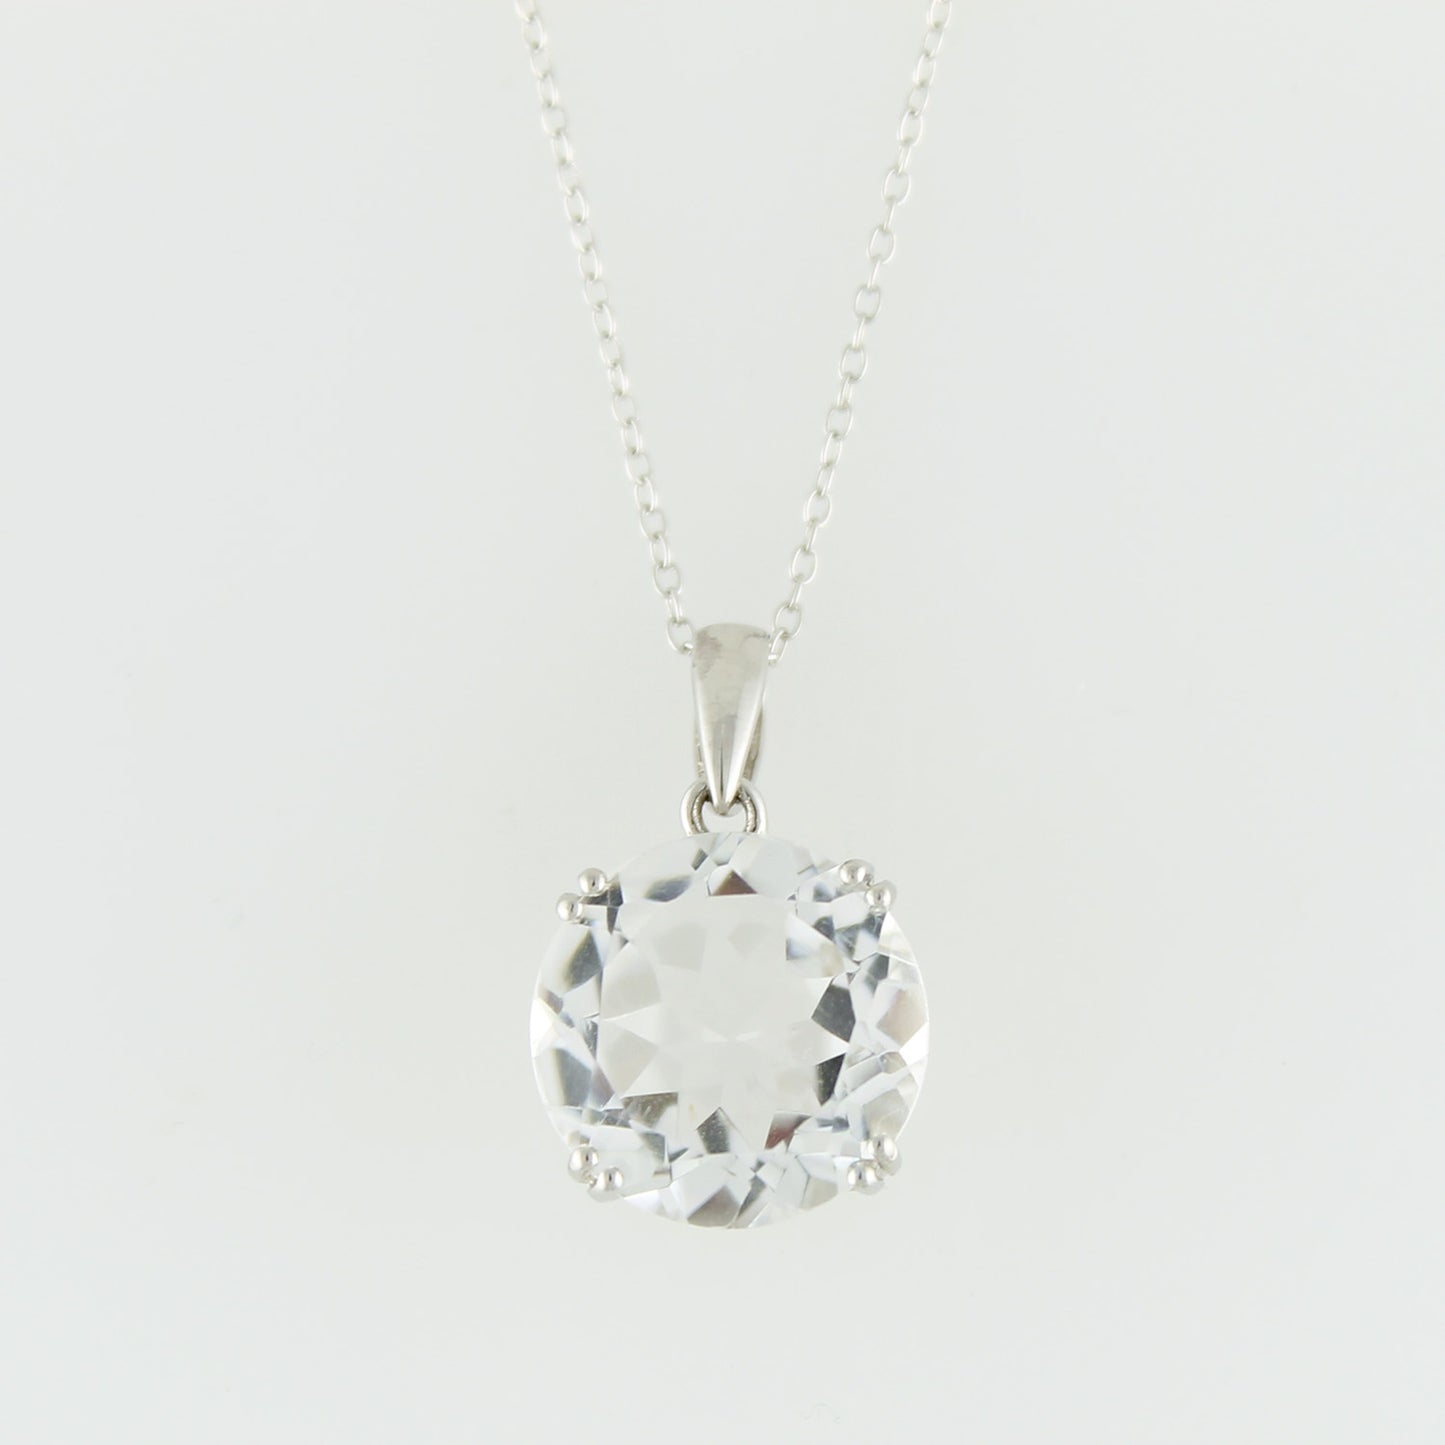 Pinctore Rhodium Over Sterling Silver 9.43ctw Crystal Pendant 0.93'L with 18' Chain - pinctore